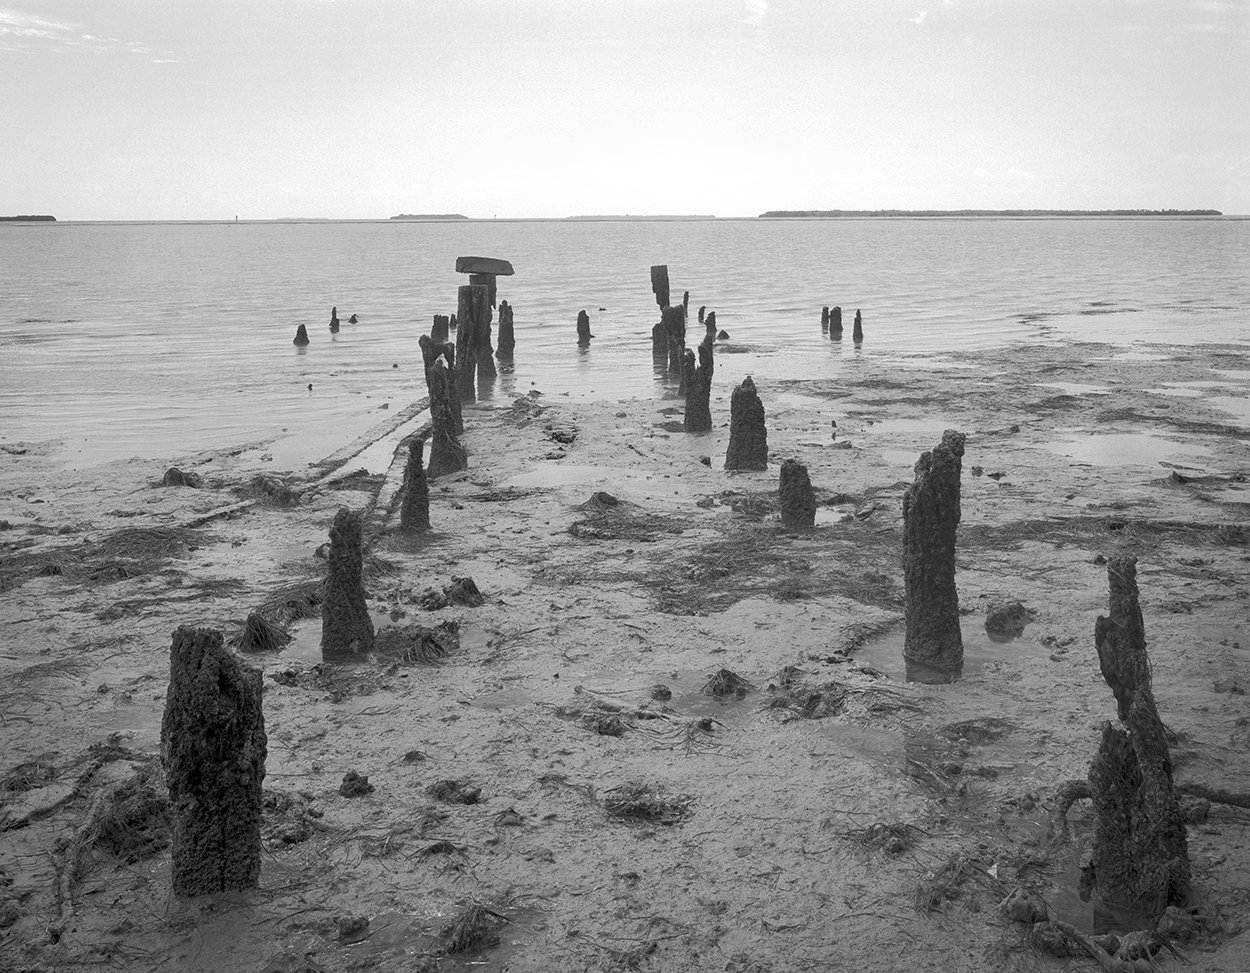 View of the Florida Bay at Flamingo Point, the most southern point of The Everglades National Park. These remains of a pier were once part of the visitors "entertainment" at Flamingo point This image of the Florida Everglades was captured on old school analog film with a large format camera. The film was developed by the photographer. After professionally scanning, besides some old school local contrast adjustments (dodging and burning) no post processing was applied. Film photography gives a tone and “feel” to the image that only film photography can accomplish. The Everglades National Park is a subtle place where earth, water, and sky blend in a low green landscape; where mere inches of elevation produce distinct changes in vegetation; and where a great wealth of birds and other wildlife find refuge. For this is almost exclusively a biological park dedicated to the preservation of a complex and precisely ordered living mechanism. It lies at the interface between temperate and sub-tropical America, giving a rich diversity of species, many at the limit of their ranges. its preservation for the benefit of present and future generations is better assured by awarding the Everglades with six designation. This alone makes the park unique since there is no other park in the world with six designations of any kind. - a National Park, - a national wilderness area, (86%) - an UN International Biosphere Reserve, - an UNESCO World Heritage Site, - a Ramsar Wetland of International Importance, - and a specially protected area under the UN Environmental Cartagena Treaty.